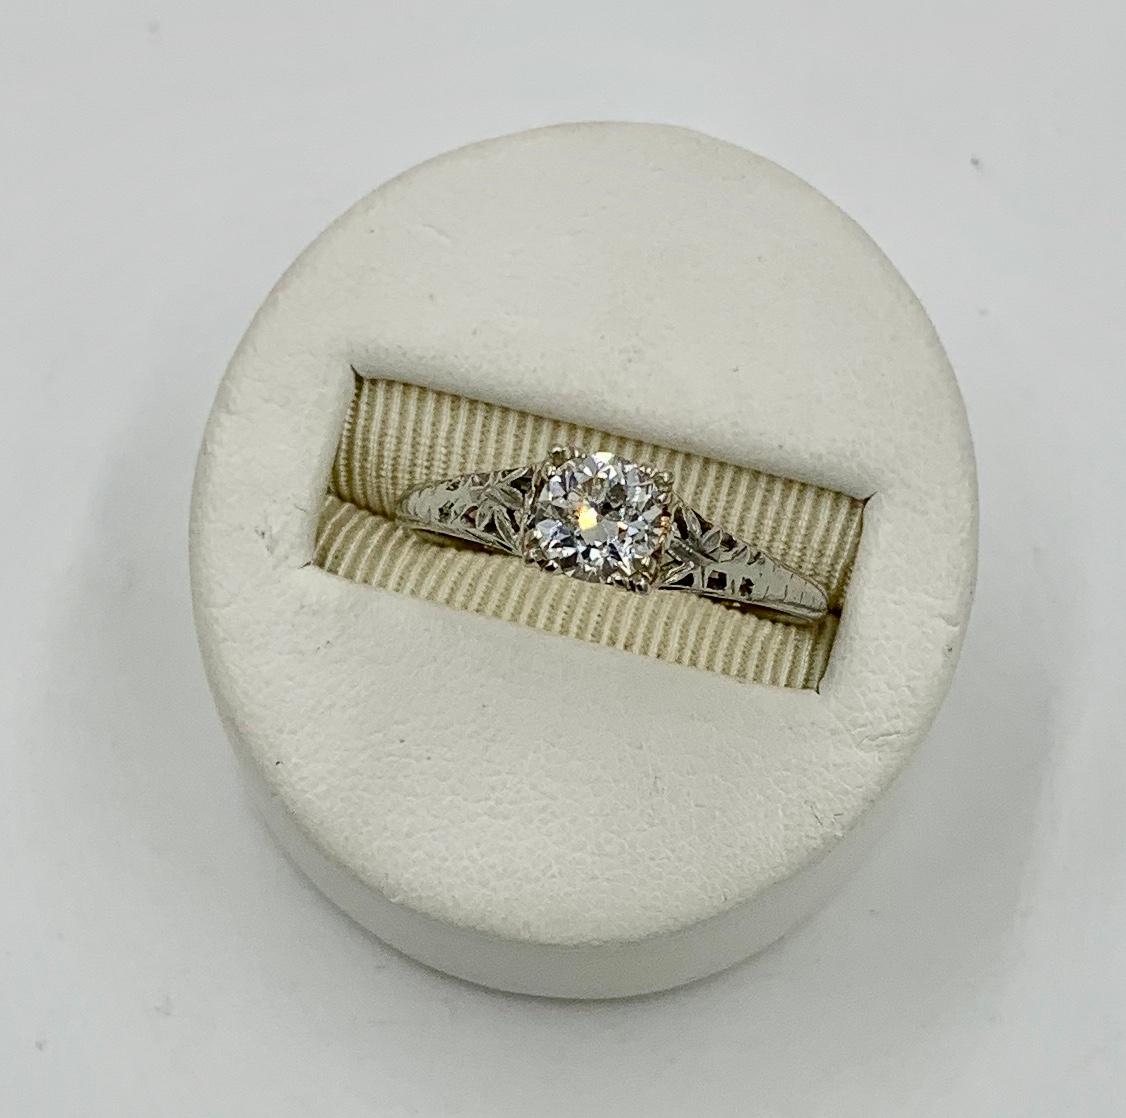 This is a stunning Antique Art Deco - Edwardian Diamond Ring set with a spectacular .65 Carat Old European Cut Diamond in a beautiful open work setting in 18 Karat White Gold.  The Old European Cut Diamond is absolutely stunning with the brilliant